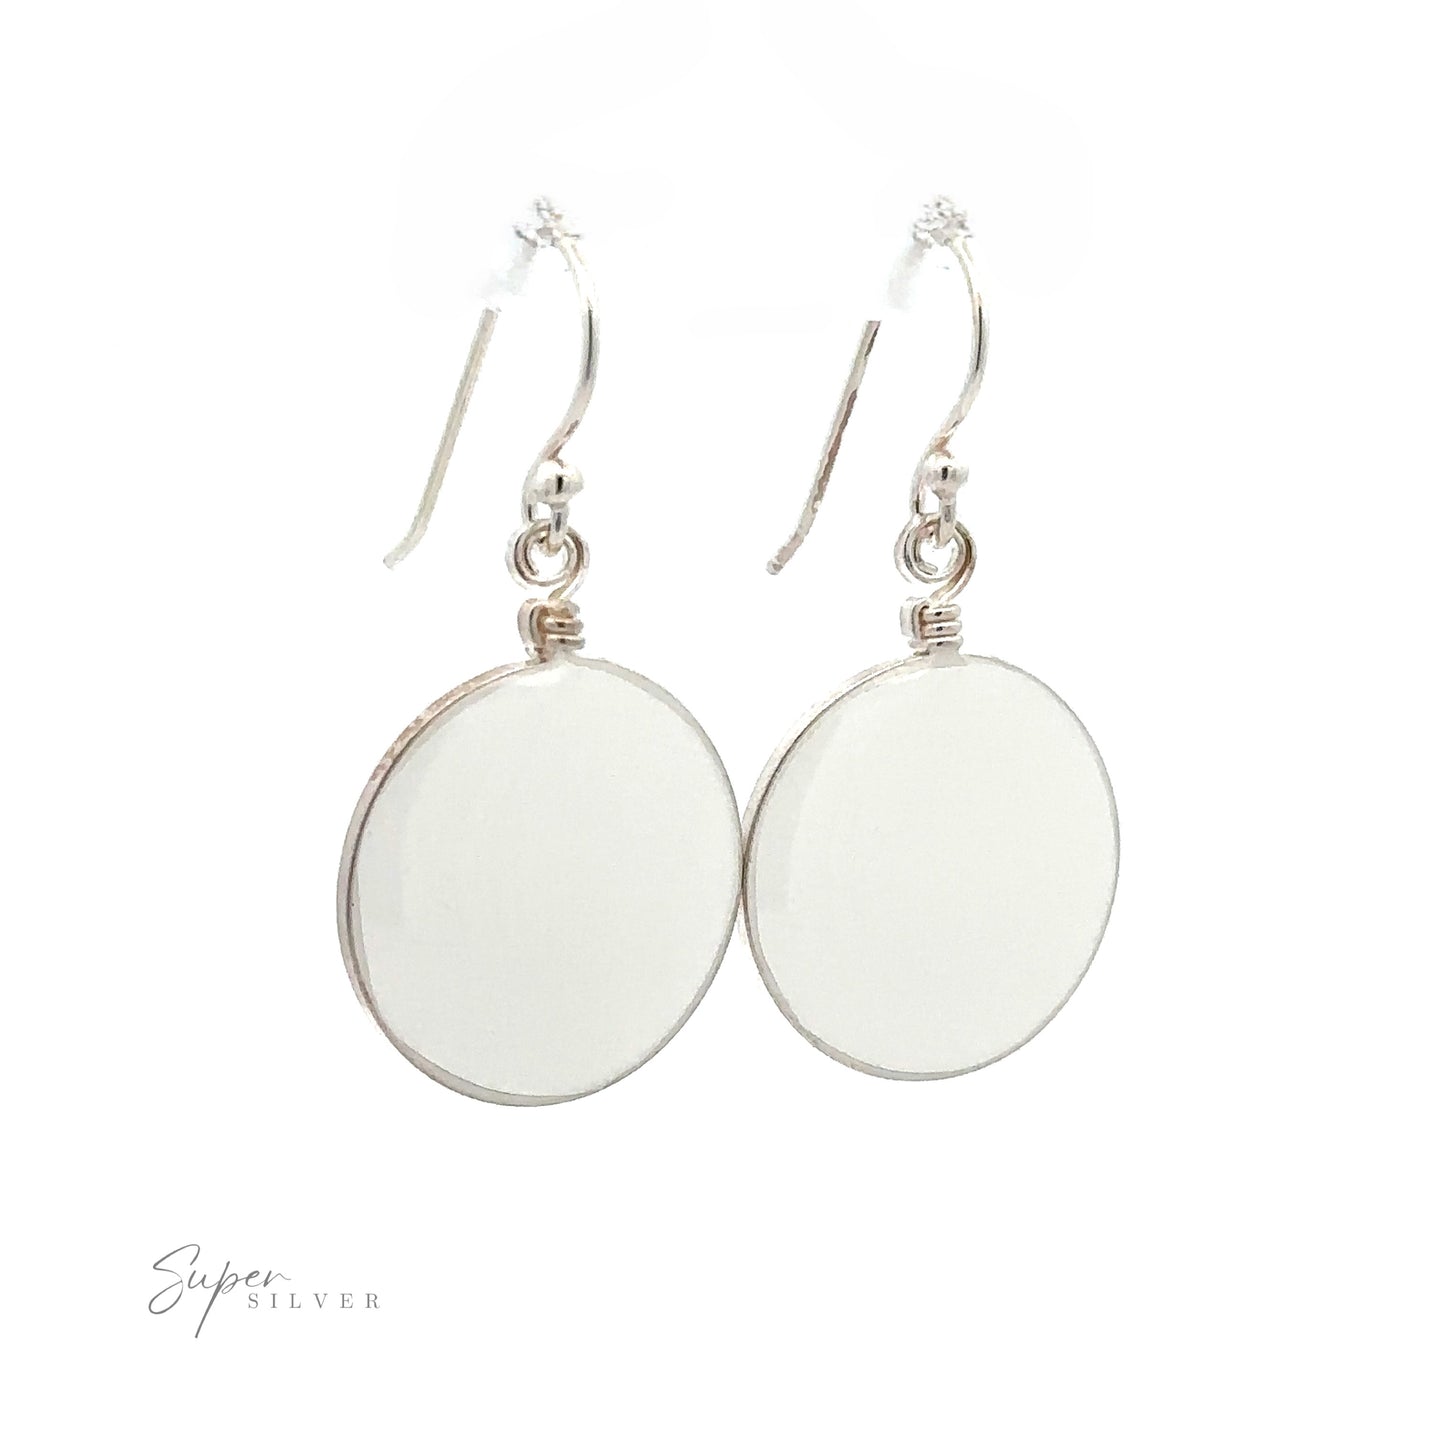 
                  
                    A pair of Round Glass Earrings with flat, round white pendants. The brand name "Super Silver" is visible in the bottom left corner.
                  
                